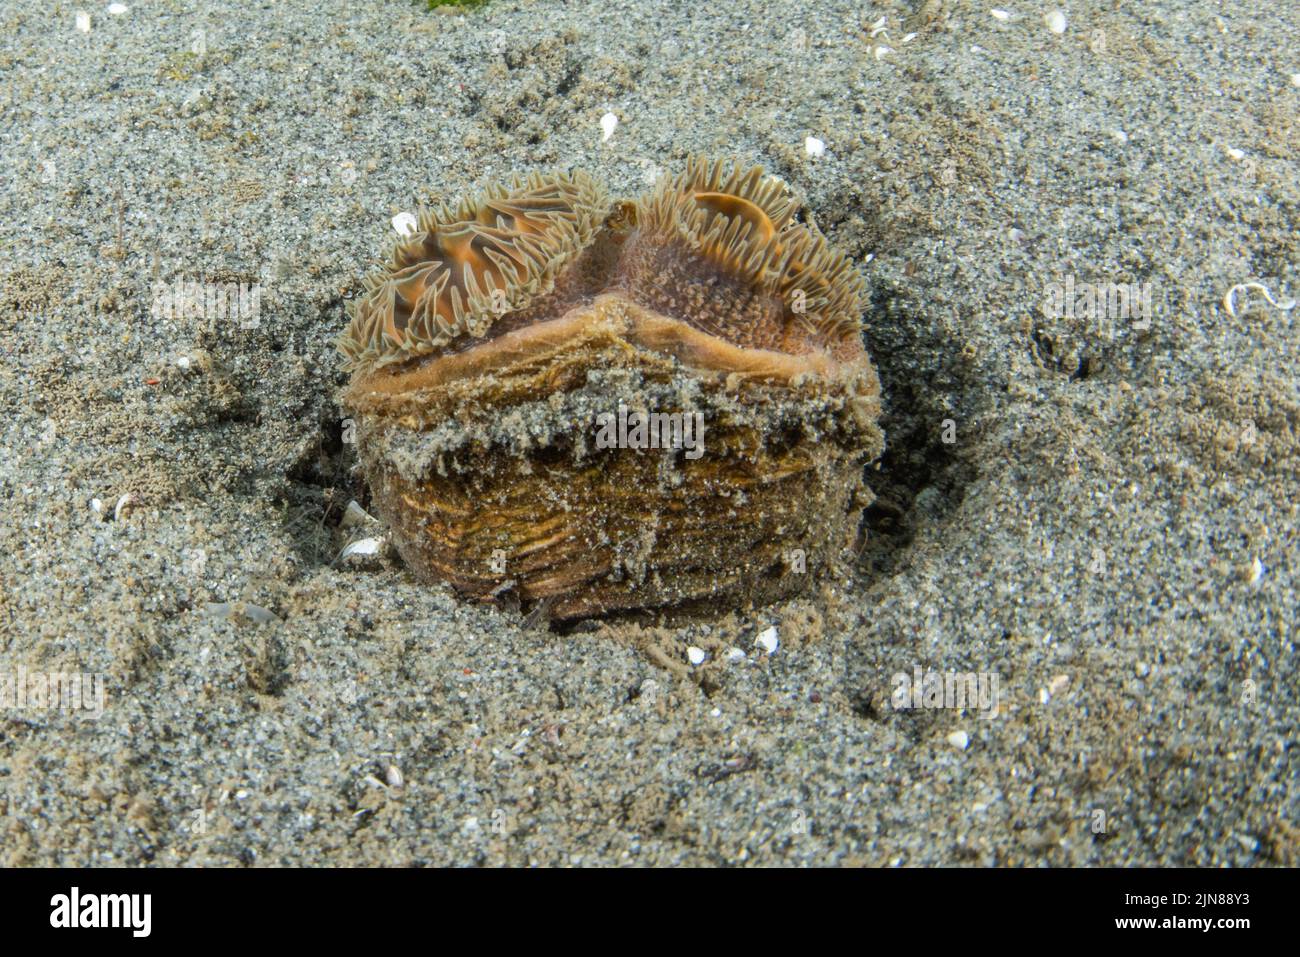 The paired siphon of a clam protrudes above the sandy bottom in the pacific ocean off the coast of California. Stock Photo